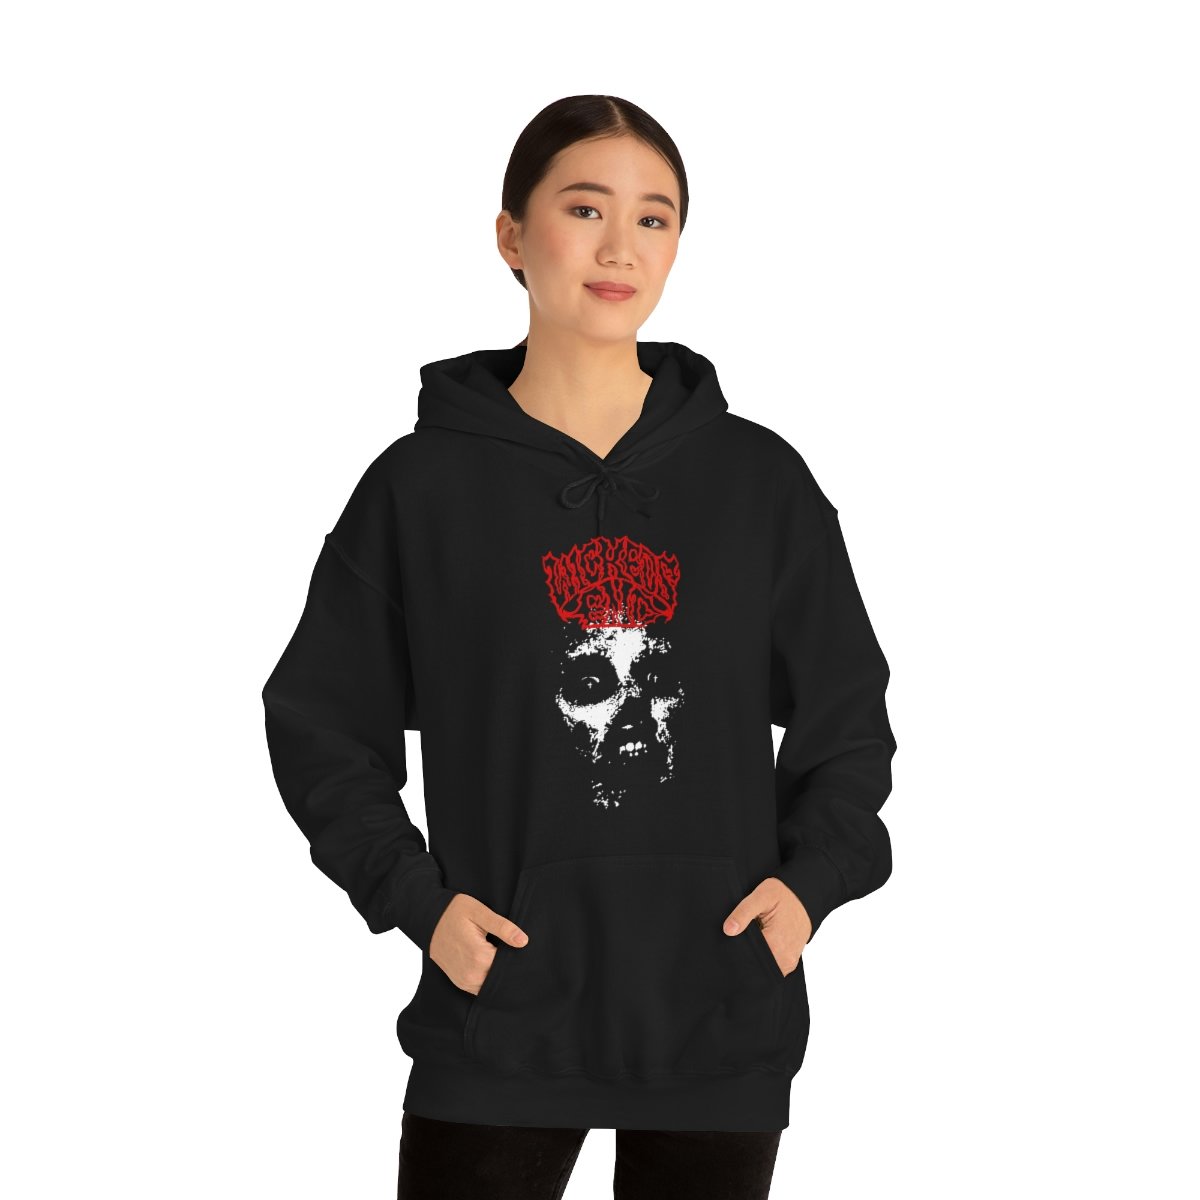 Wickeds End – Zombie Girl Pullover Hooded Sweatshirt